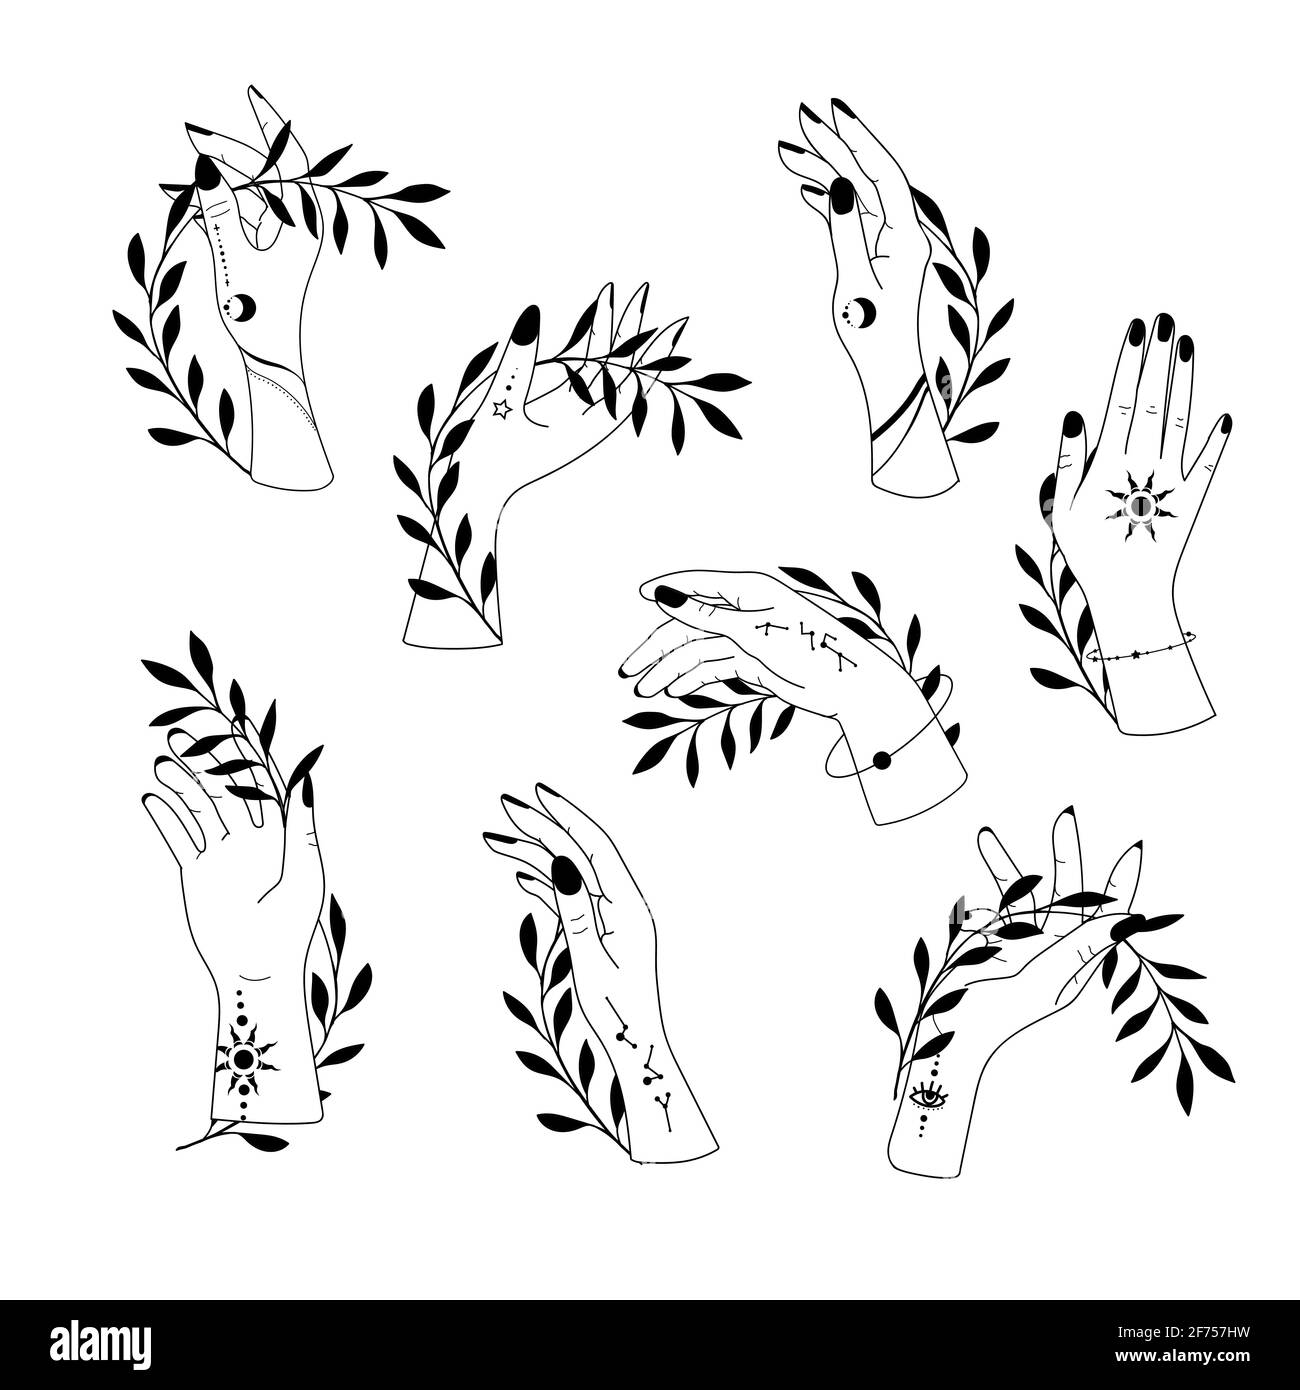 Collection hand drawn hands. Magic astrological symbols vector illustrations. Can use Tattoo design, mystic esoteric symbol Stock Vector